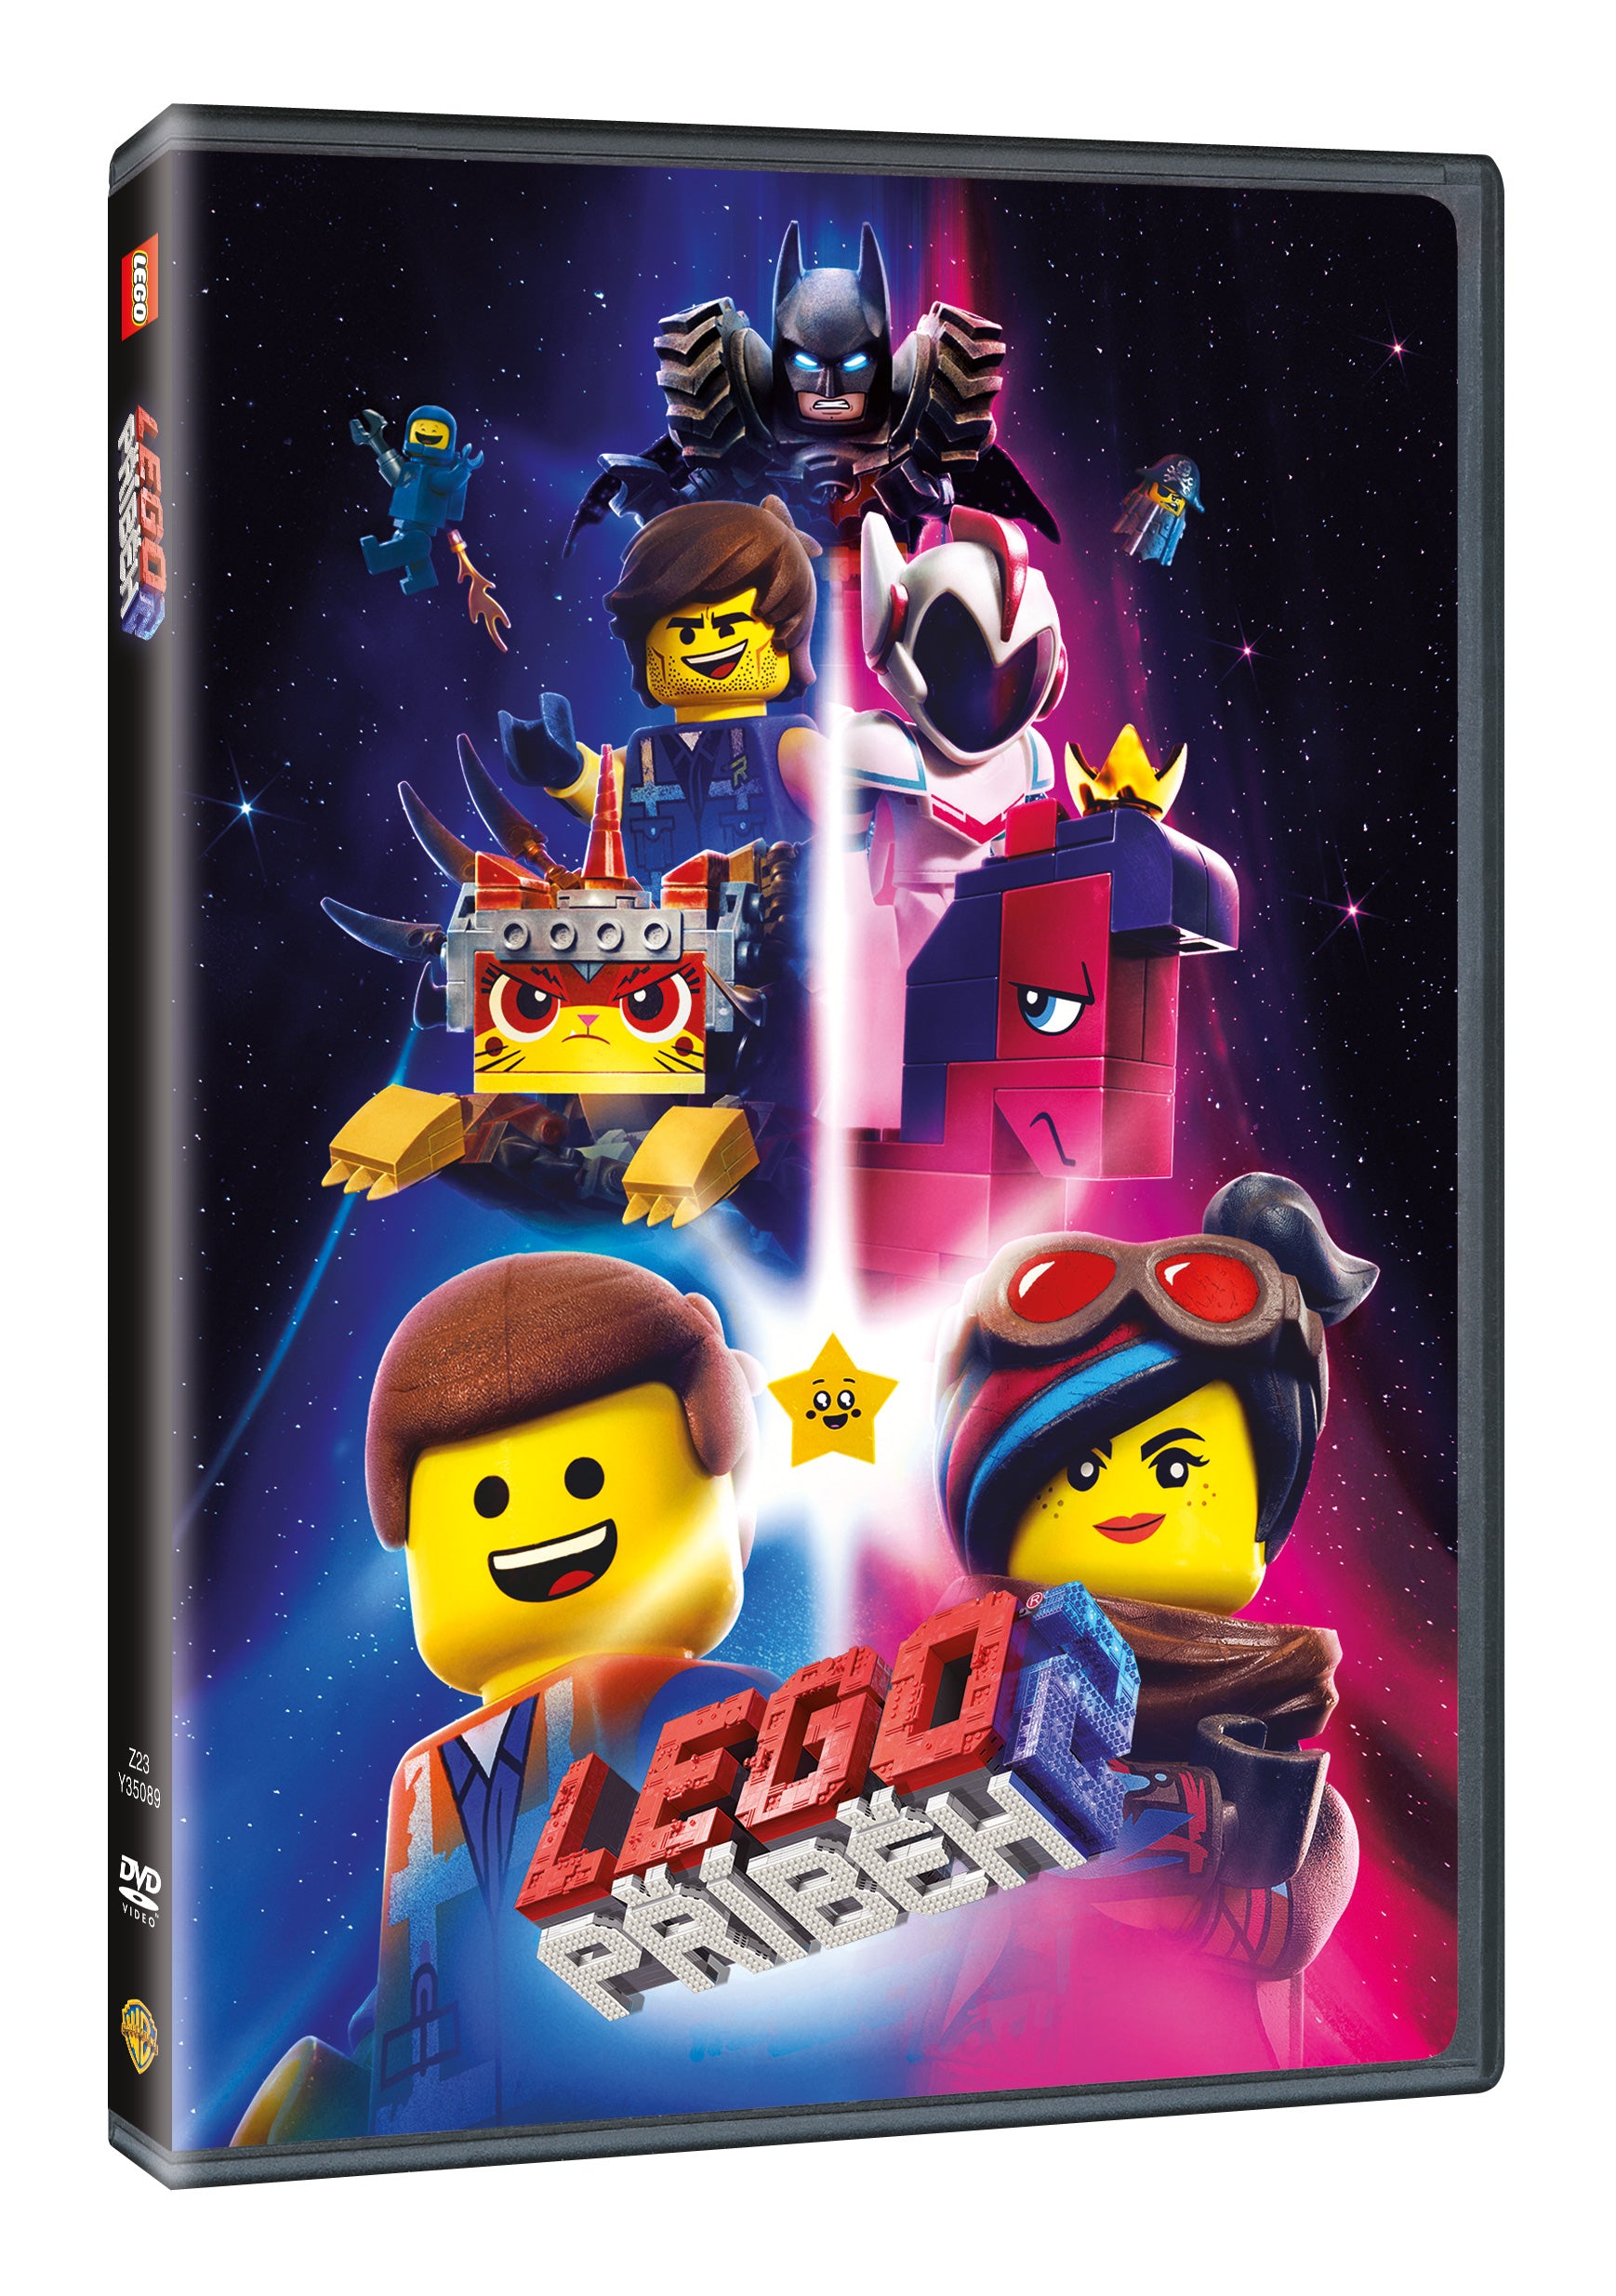 The Lego Movie 2: The Second Part / Lego pribeh 2